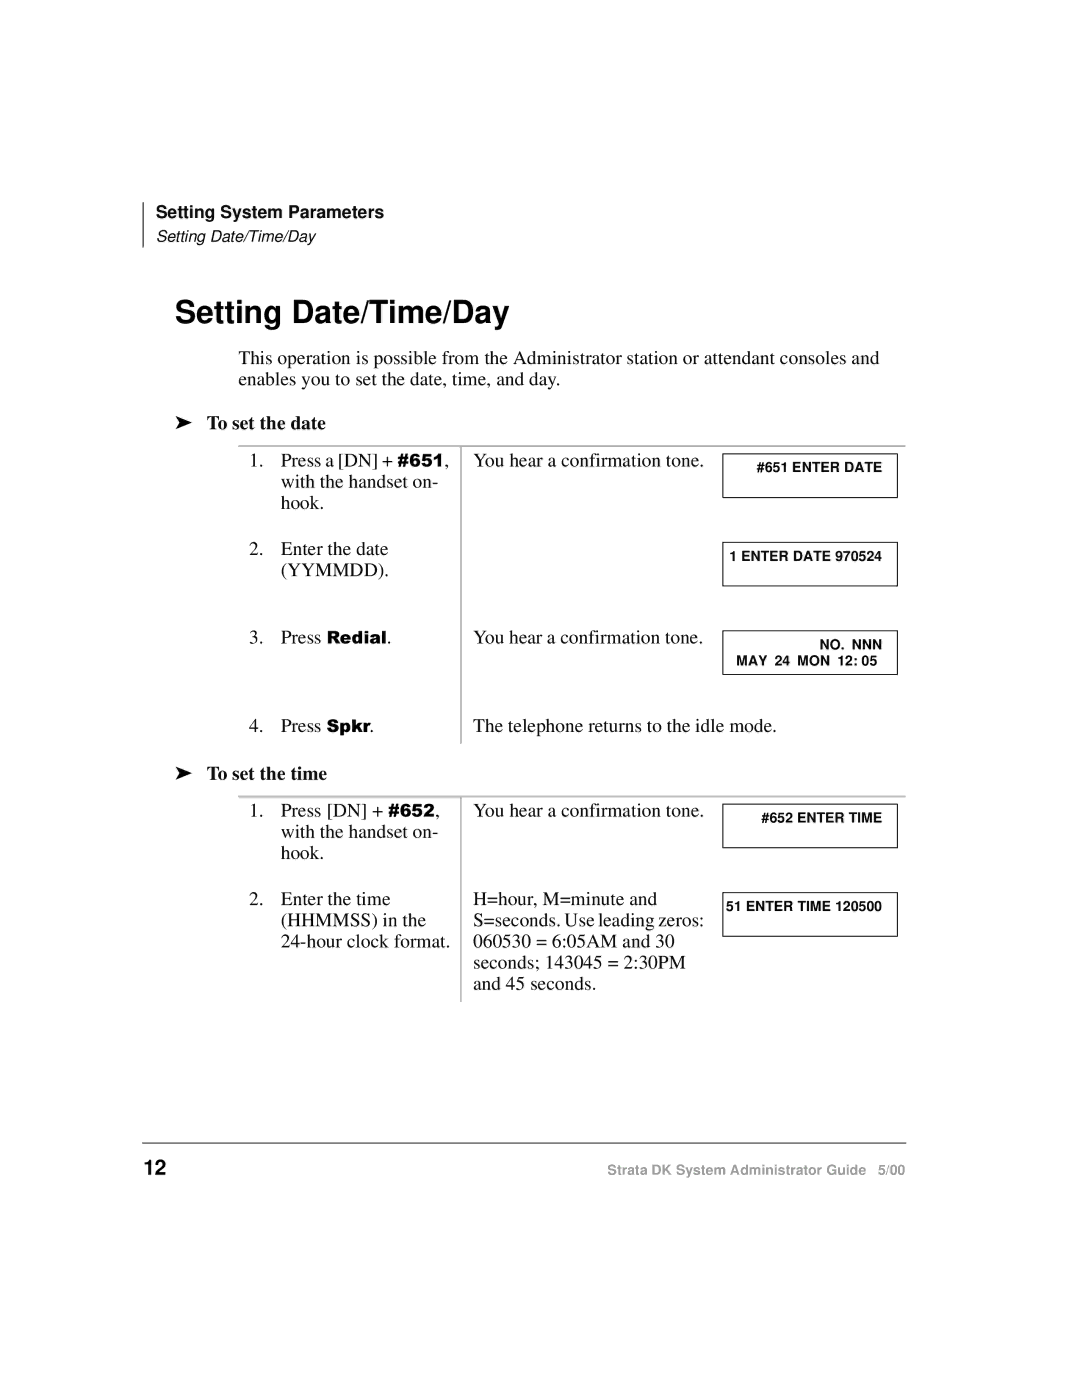 Toshiba DKA-AG-SYSTEMVD manual Setting Date/Time/Day, To set the date, To set the time 